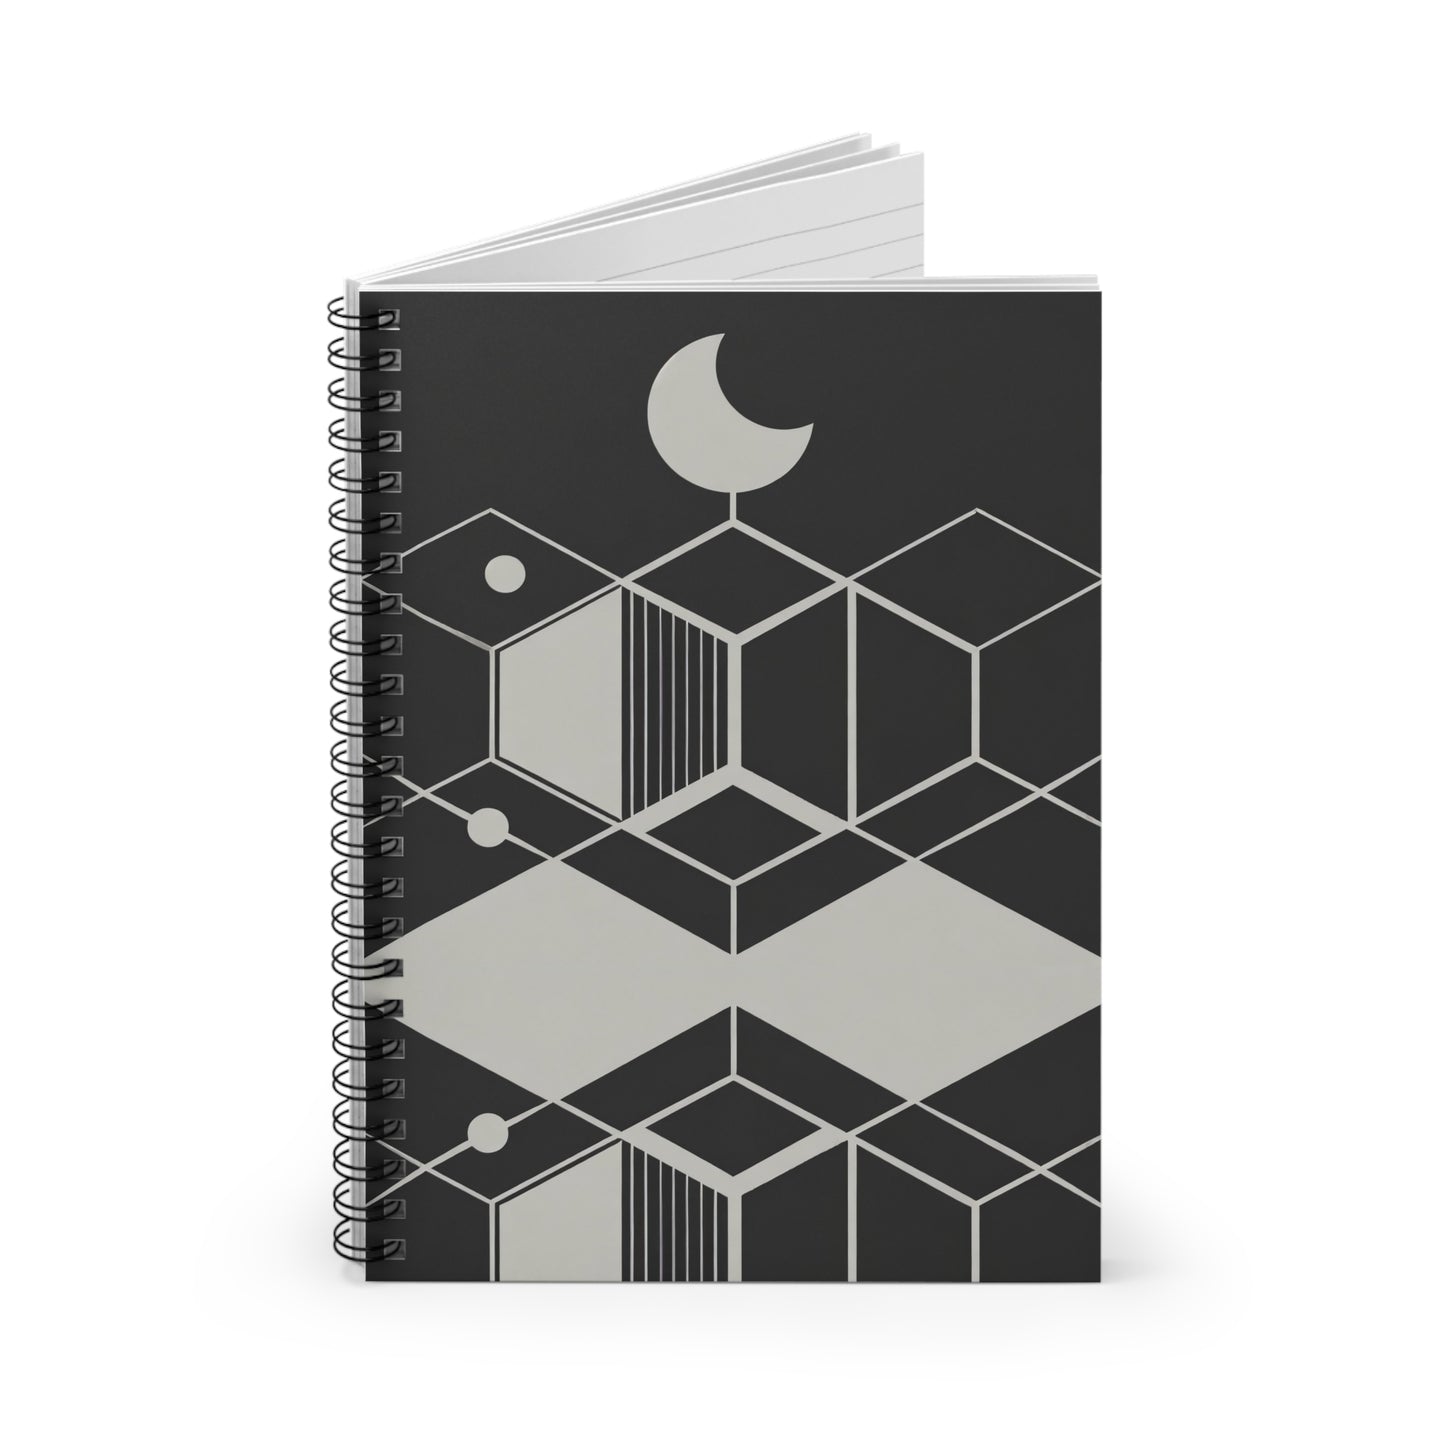 Minimalist Geometric Cosmic Abstract Spiral Notebook - Ruled Line